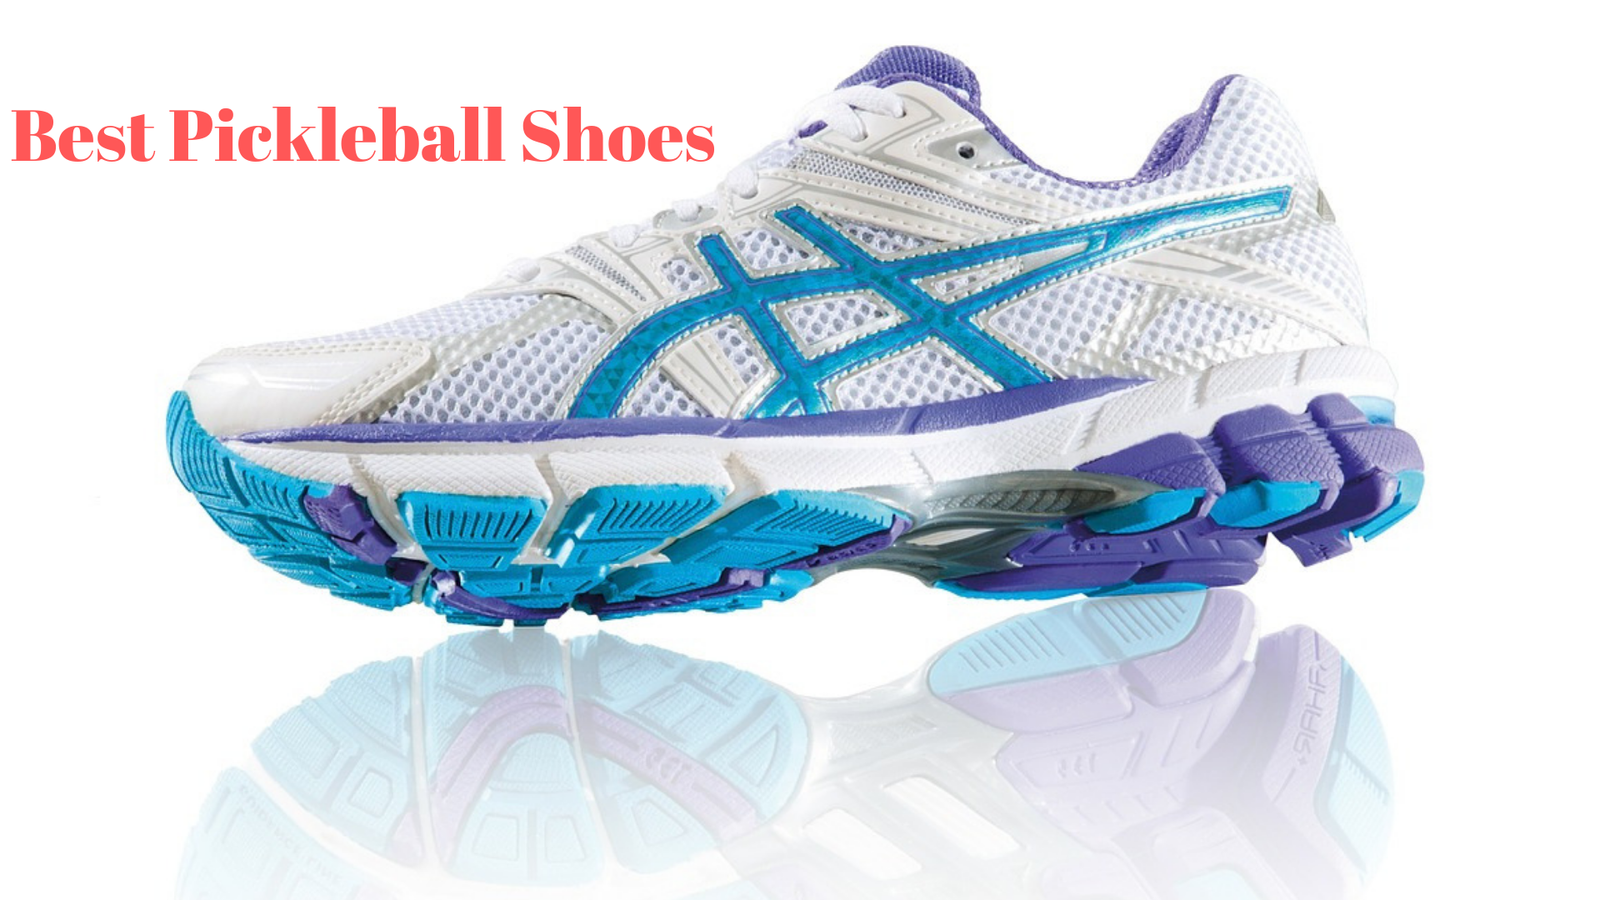 Best Pickleball Shoes for Men and Women 